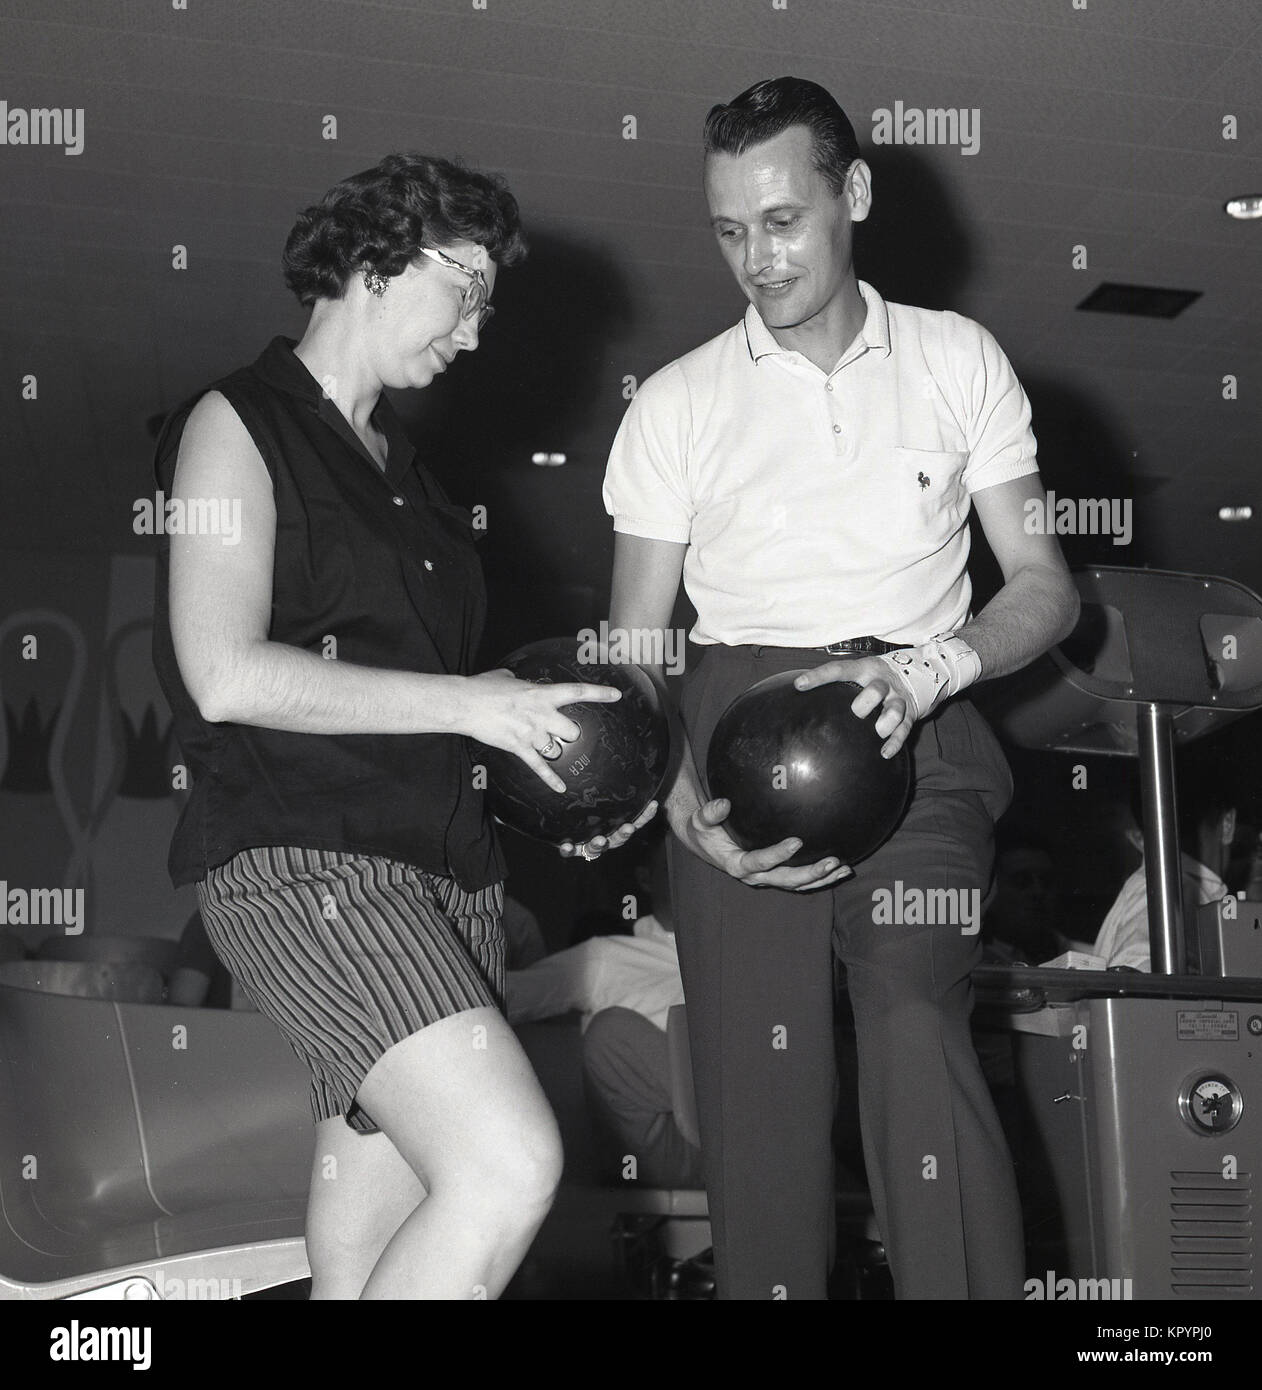 1960s, historical, man showing a lady the correct way fingers should be placed into the slots in a bowling ball at a ten-pin bowling alley, USA. Stock Photo